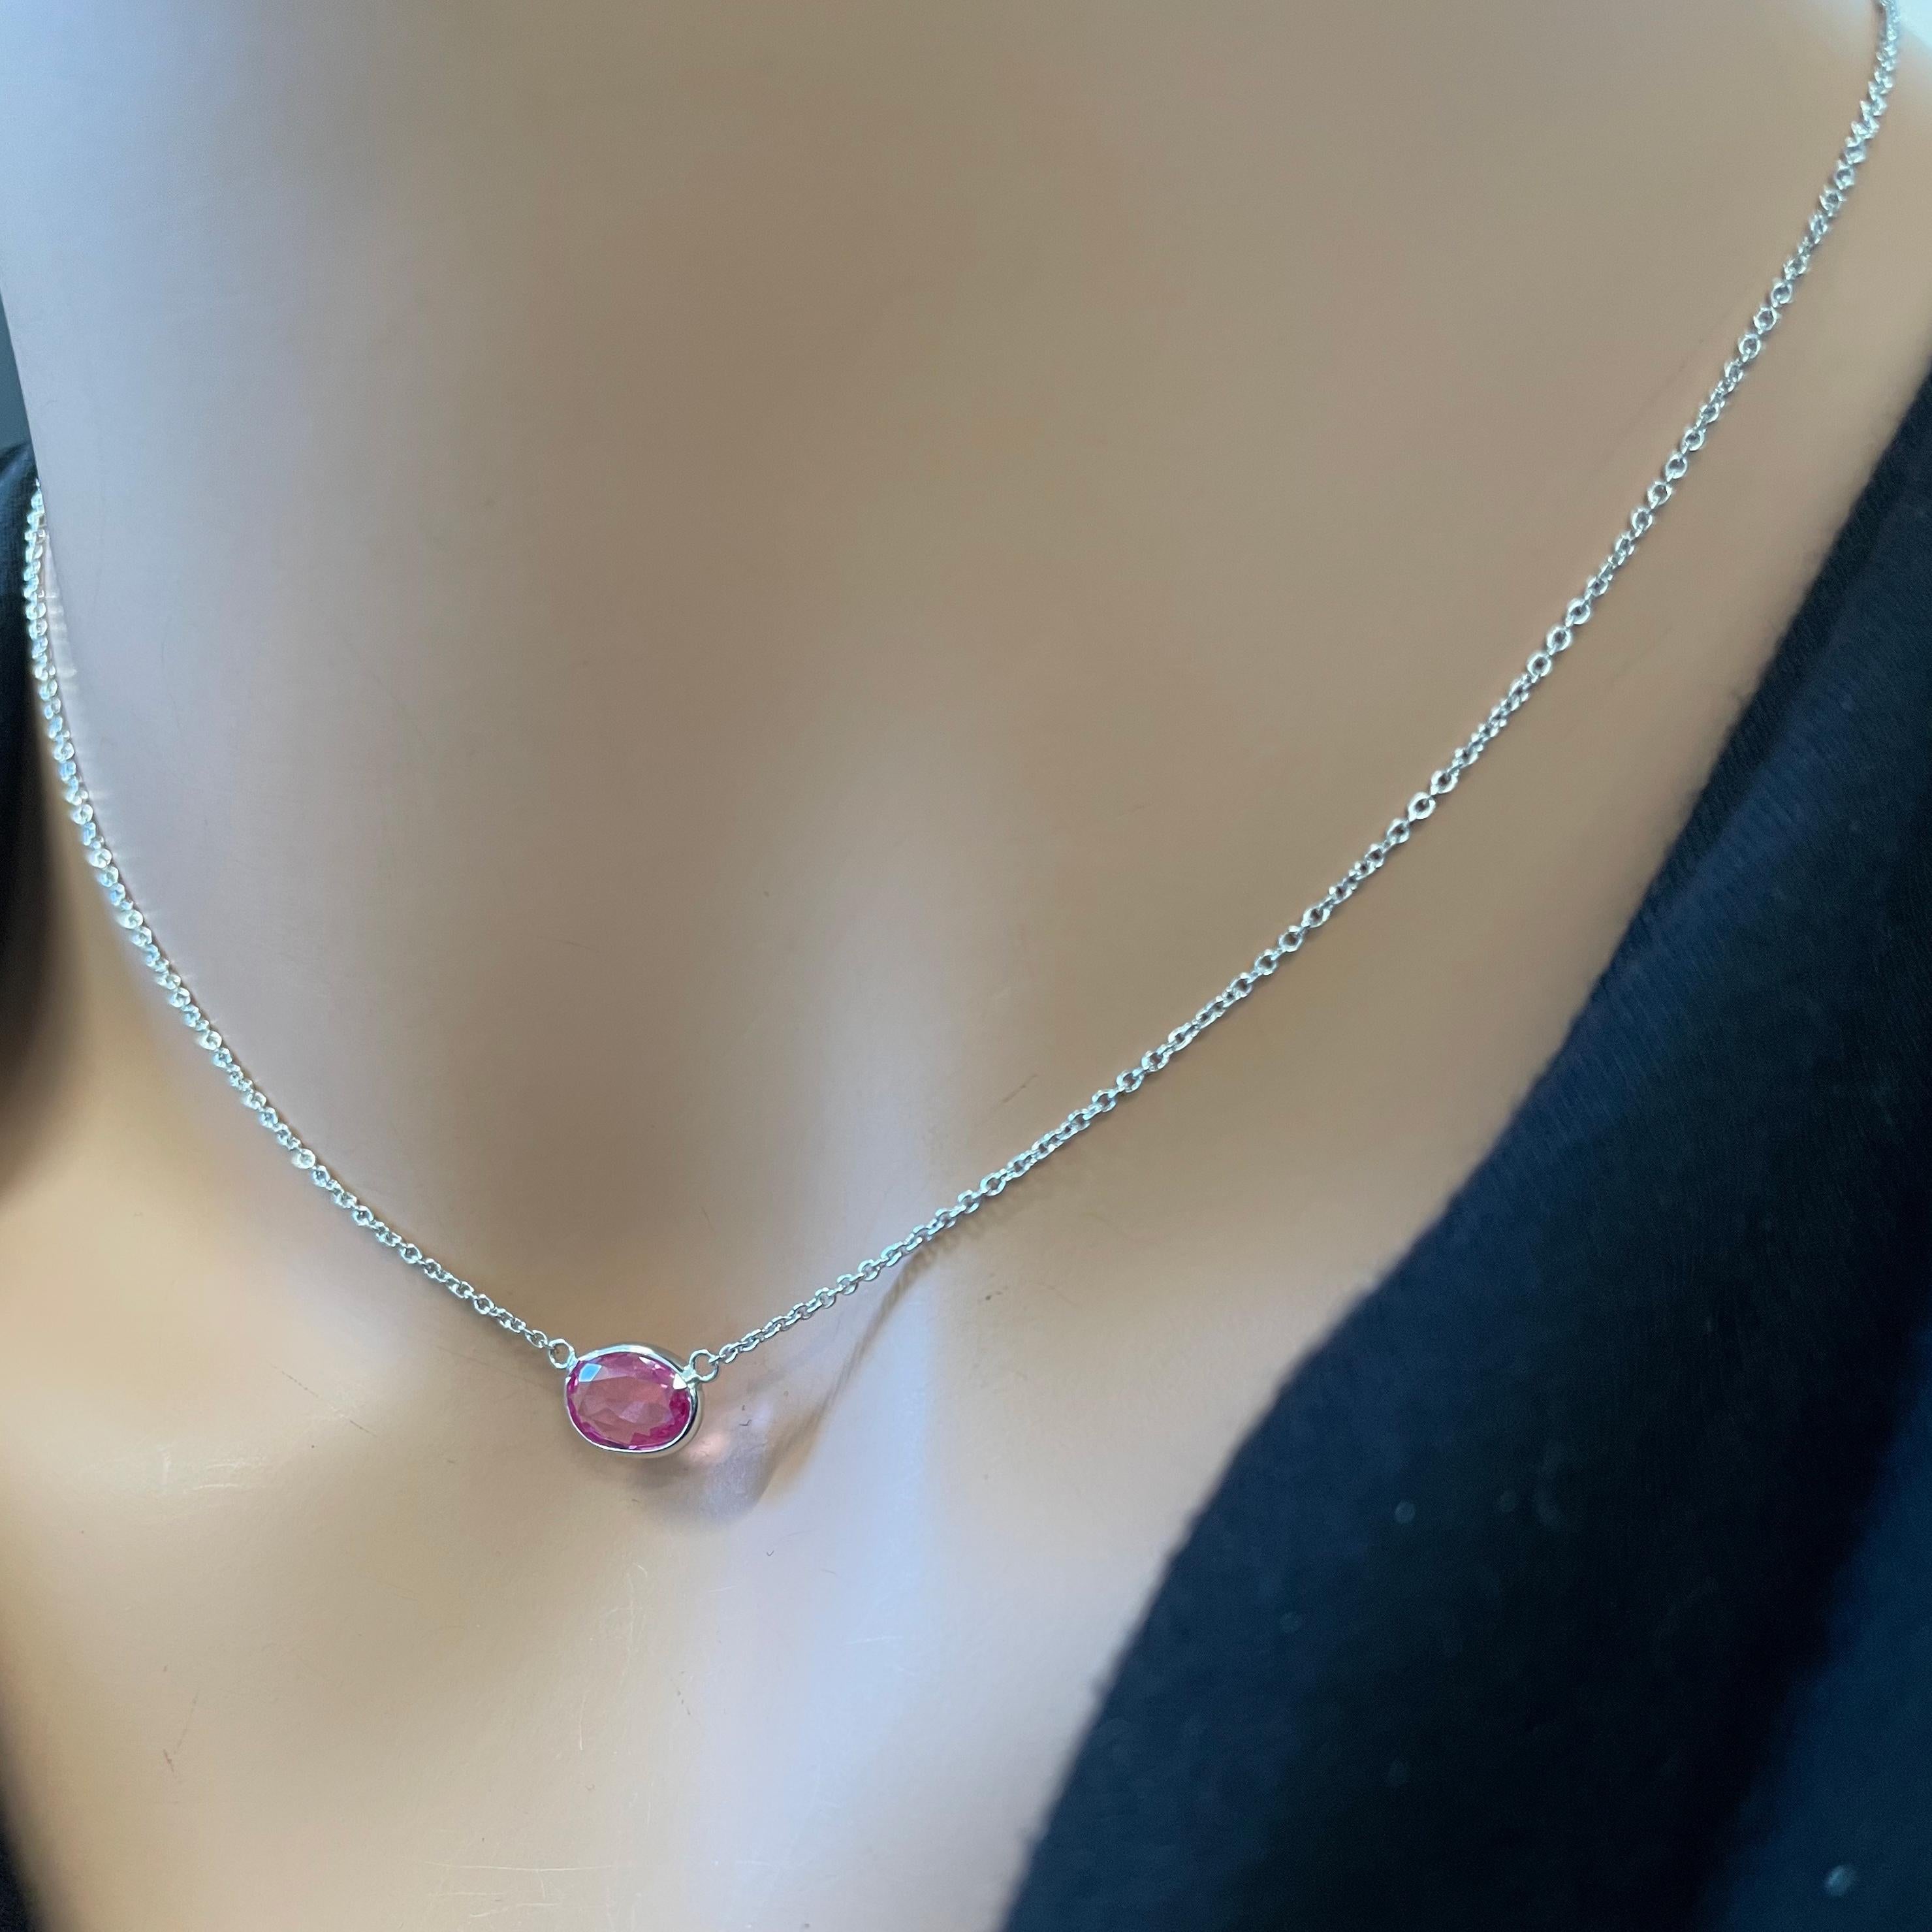 The 2.99 carat Oval Cut Sapphire Necklace in 14K White Gold is a truly magnificent piece of jewelry that seamlessly blends timeless elegance with a pop of vibrant color. This necklace features a striking sapphire gemstone with a generous total carat